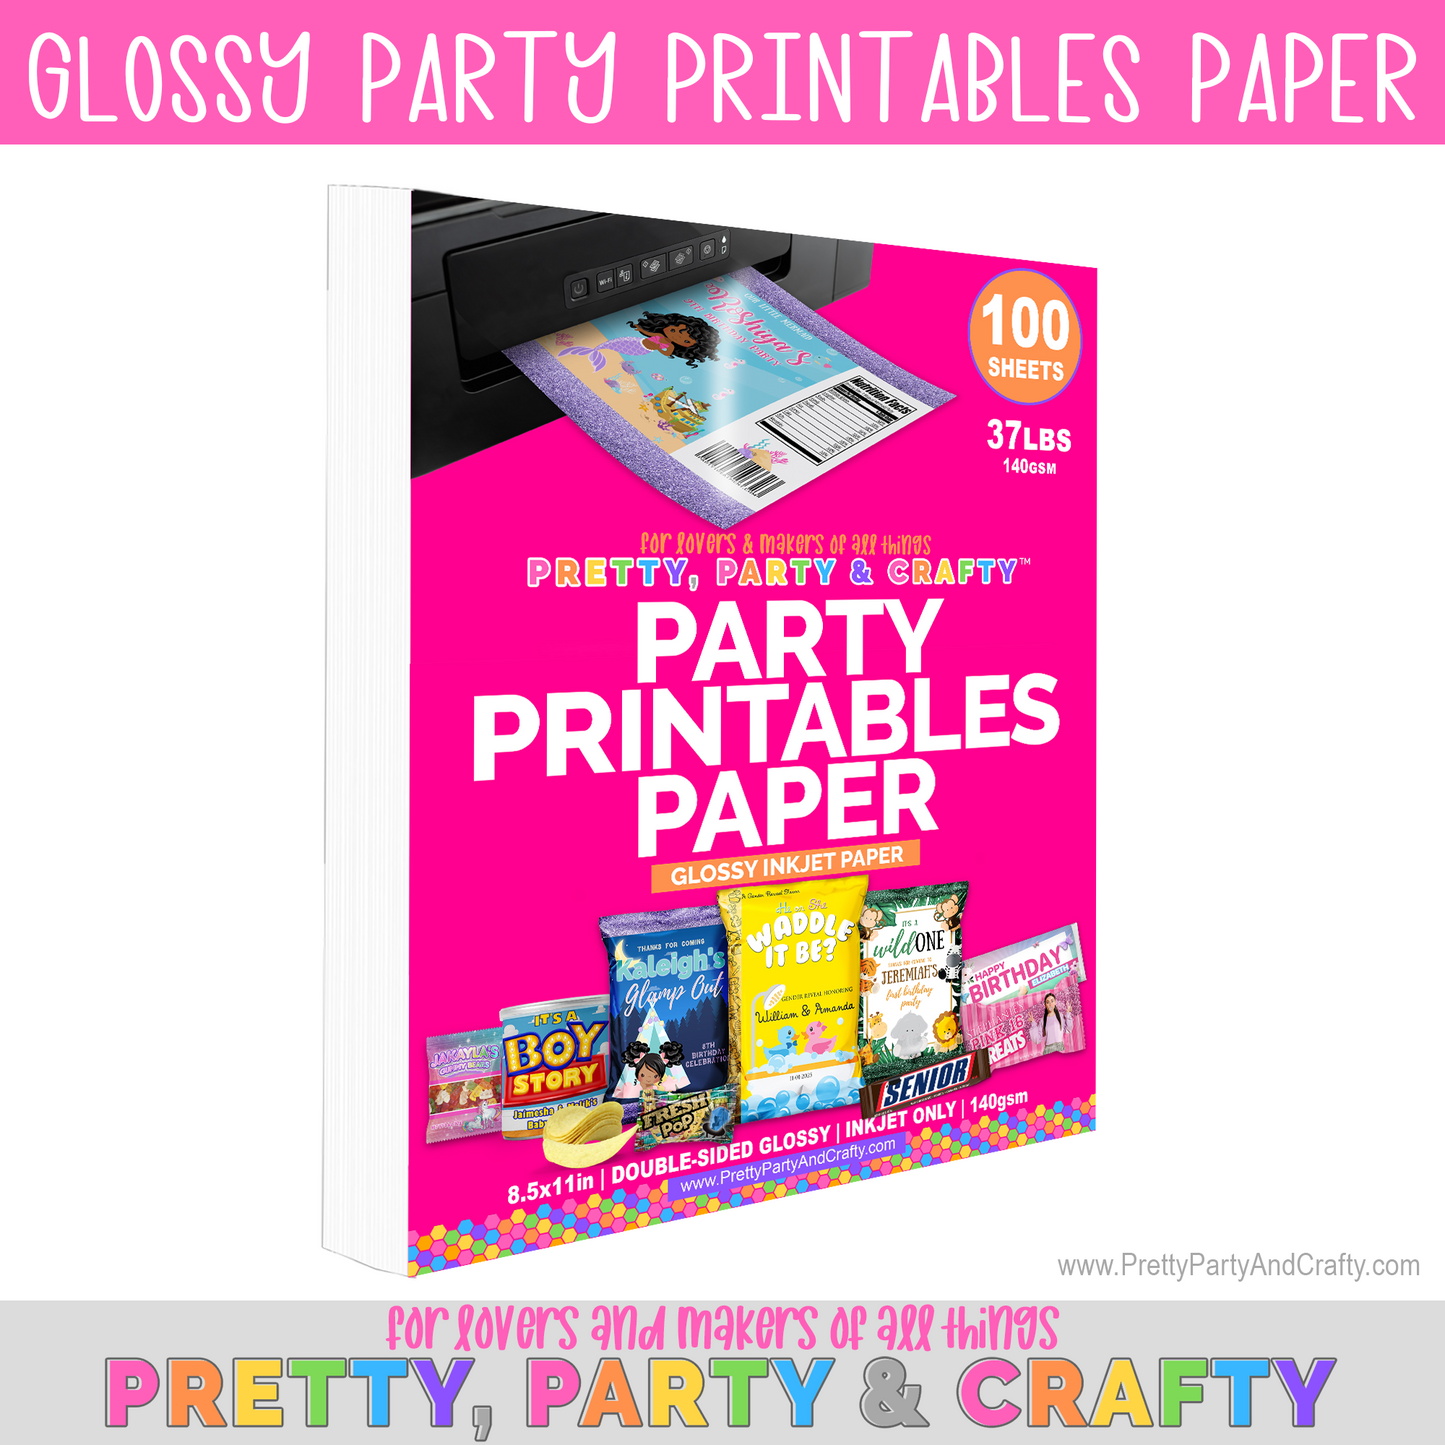 The best paper to use for custom chip bags is Pretty Party and Crafty Party Printables Paper.. Glossy paper for personalized chip bags.